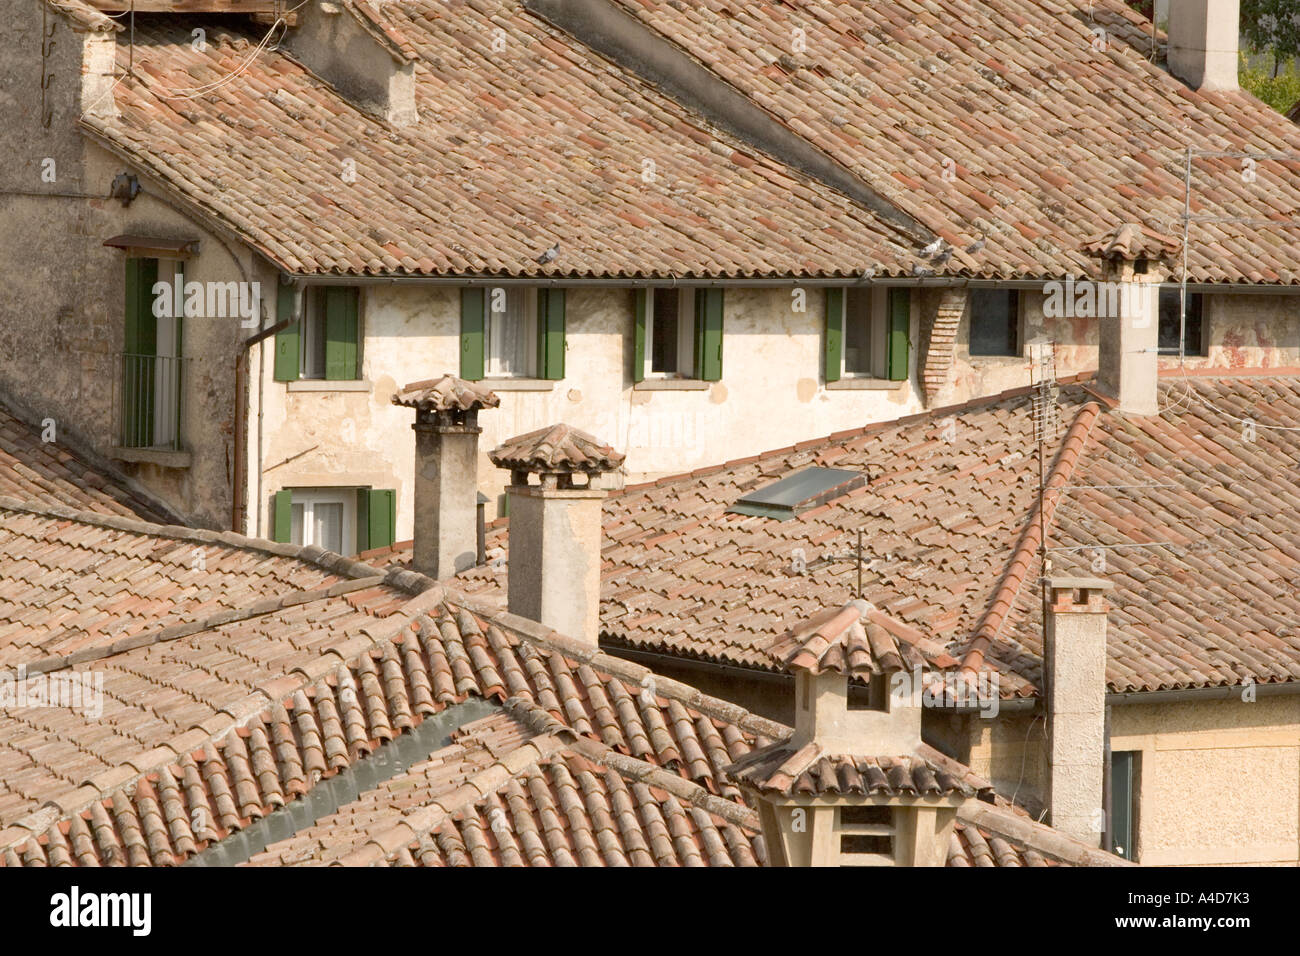 Typical tiles and chimney of the town of Asolo,  Veneto, Italy Stock Photo